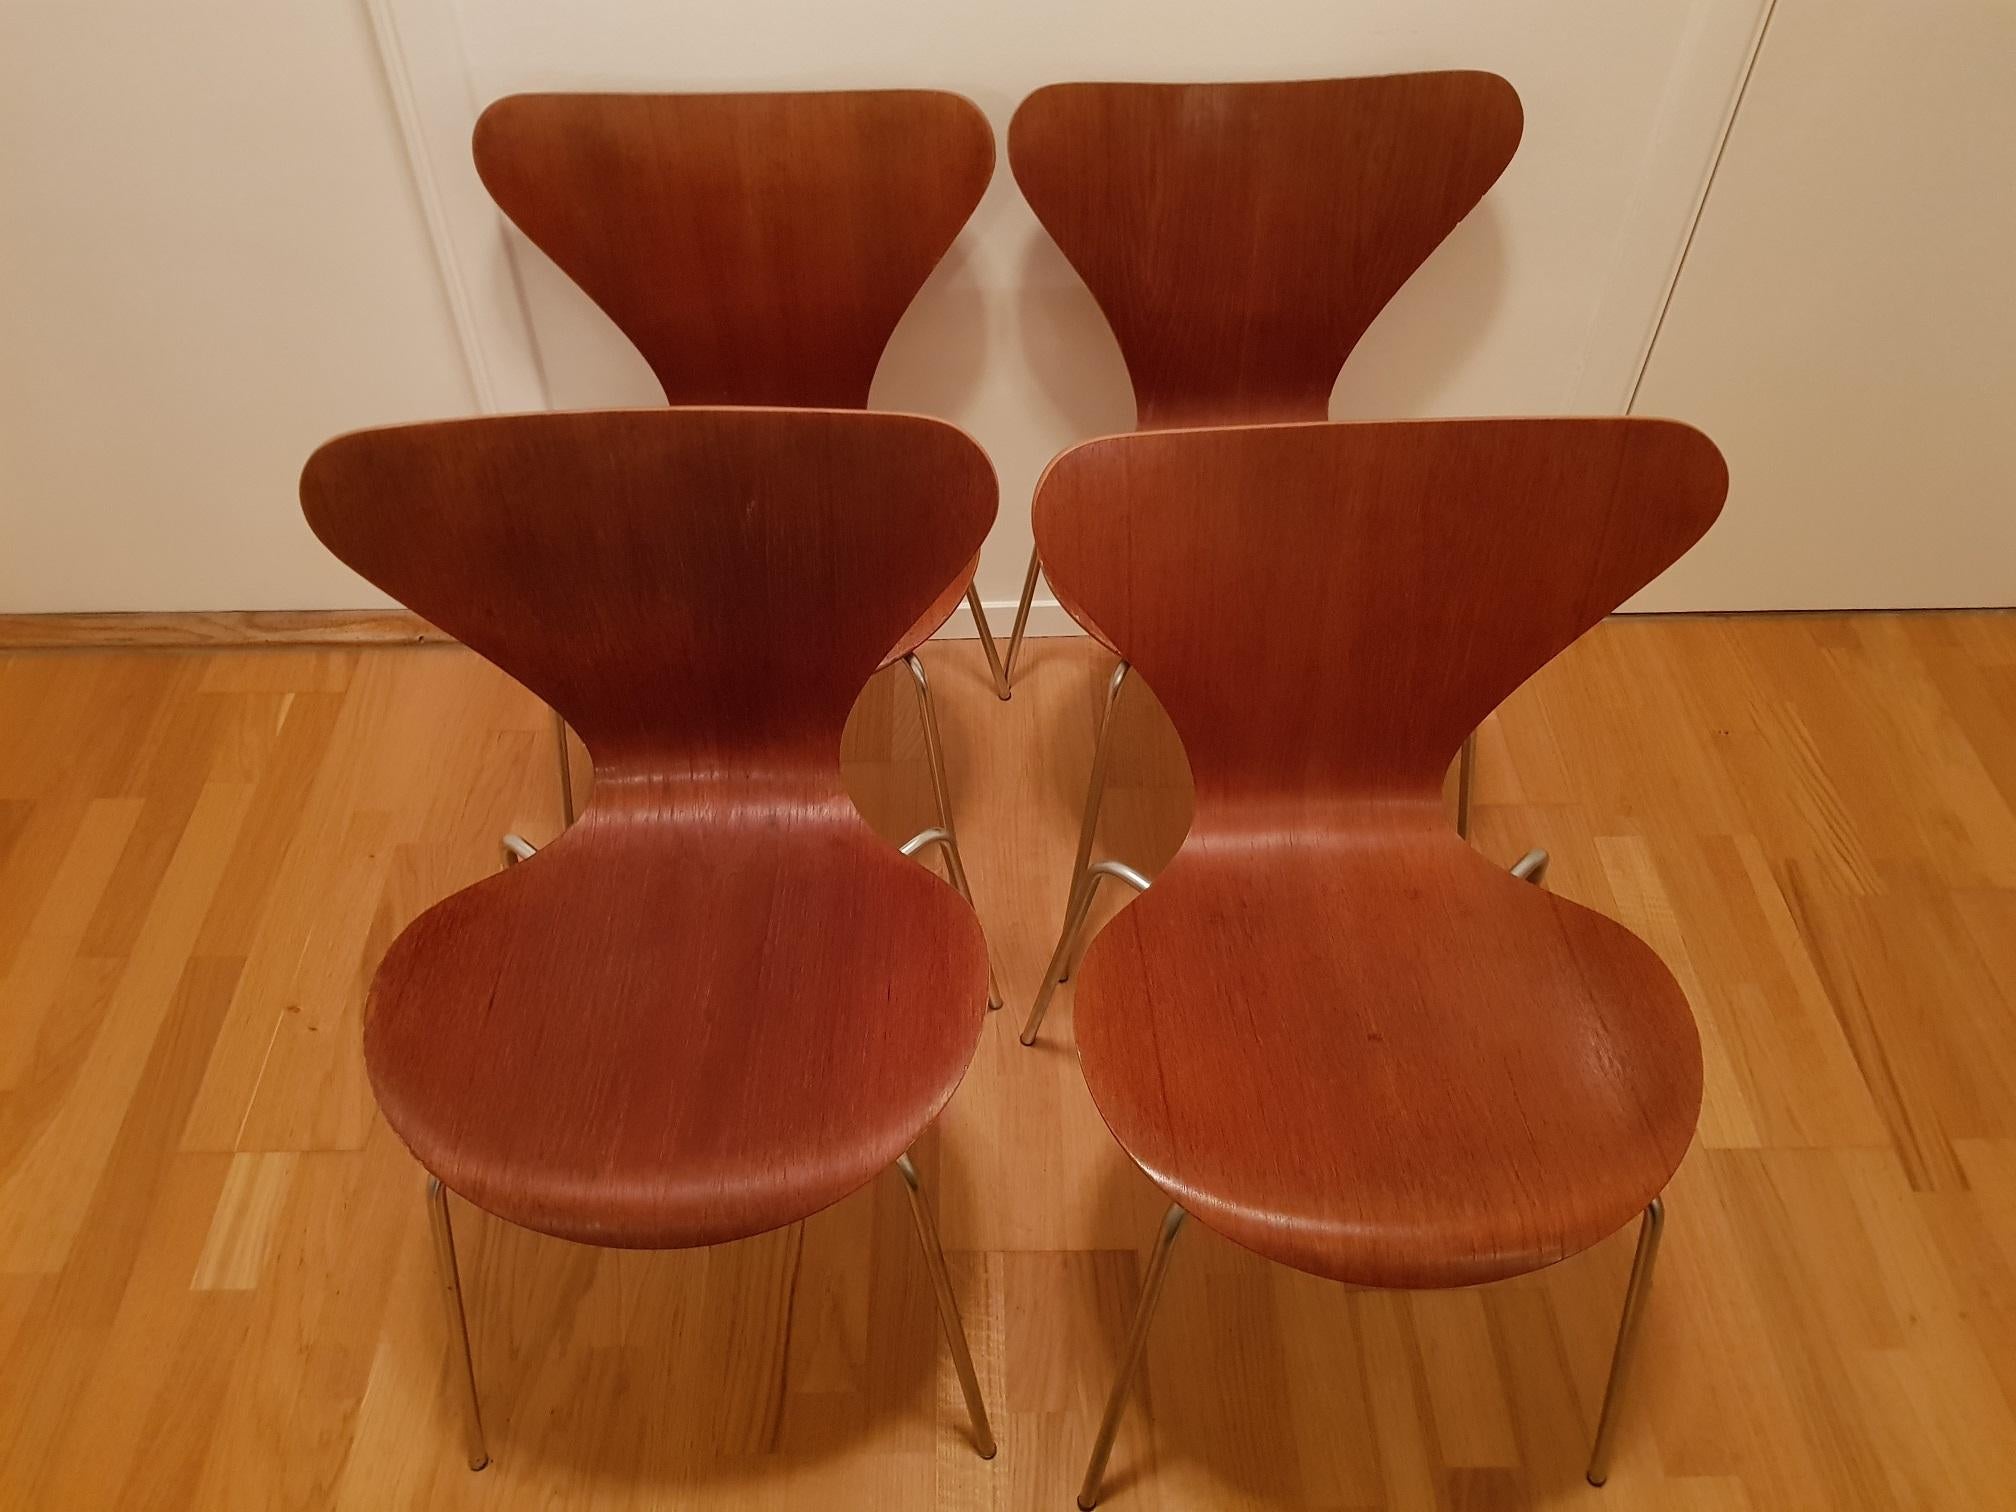 4 Vintage Series 7 Chairs 3107 in Teak by Arne Jacobsen for Fritz Hansen In Good Condition For Sale In Limhamn, SE